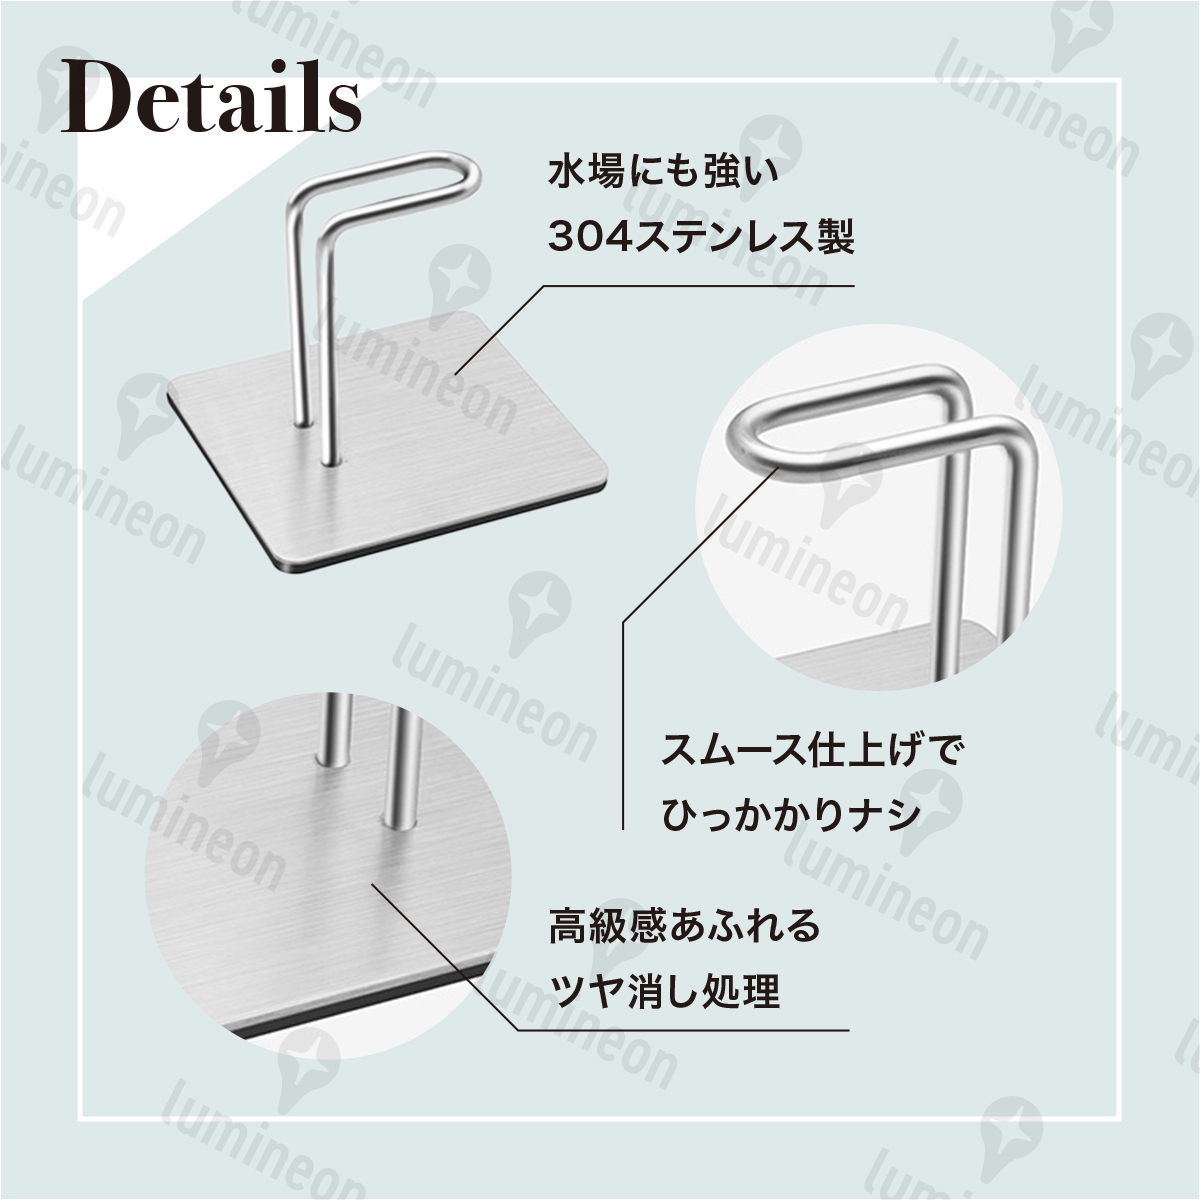  kitchen paper holder storage towel hanger magnet inserting large size stand case cost ko stylish simple g161b 3